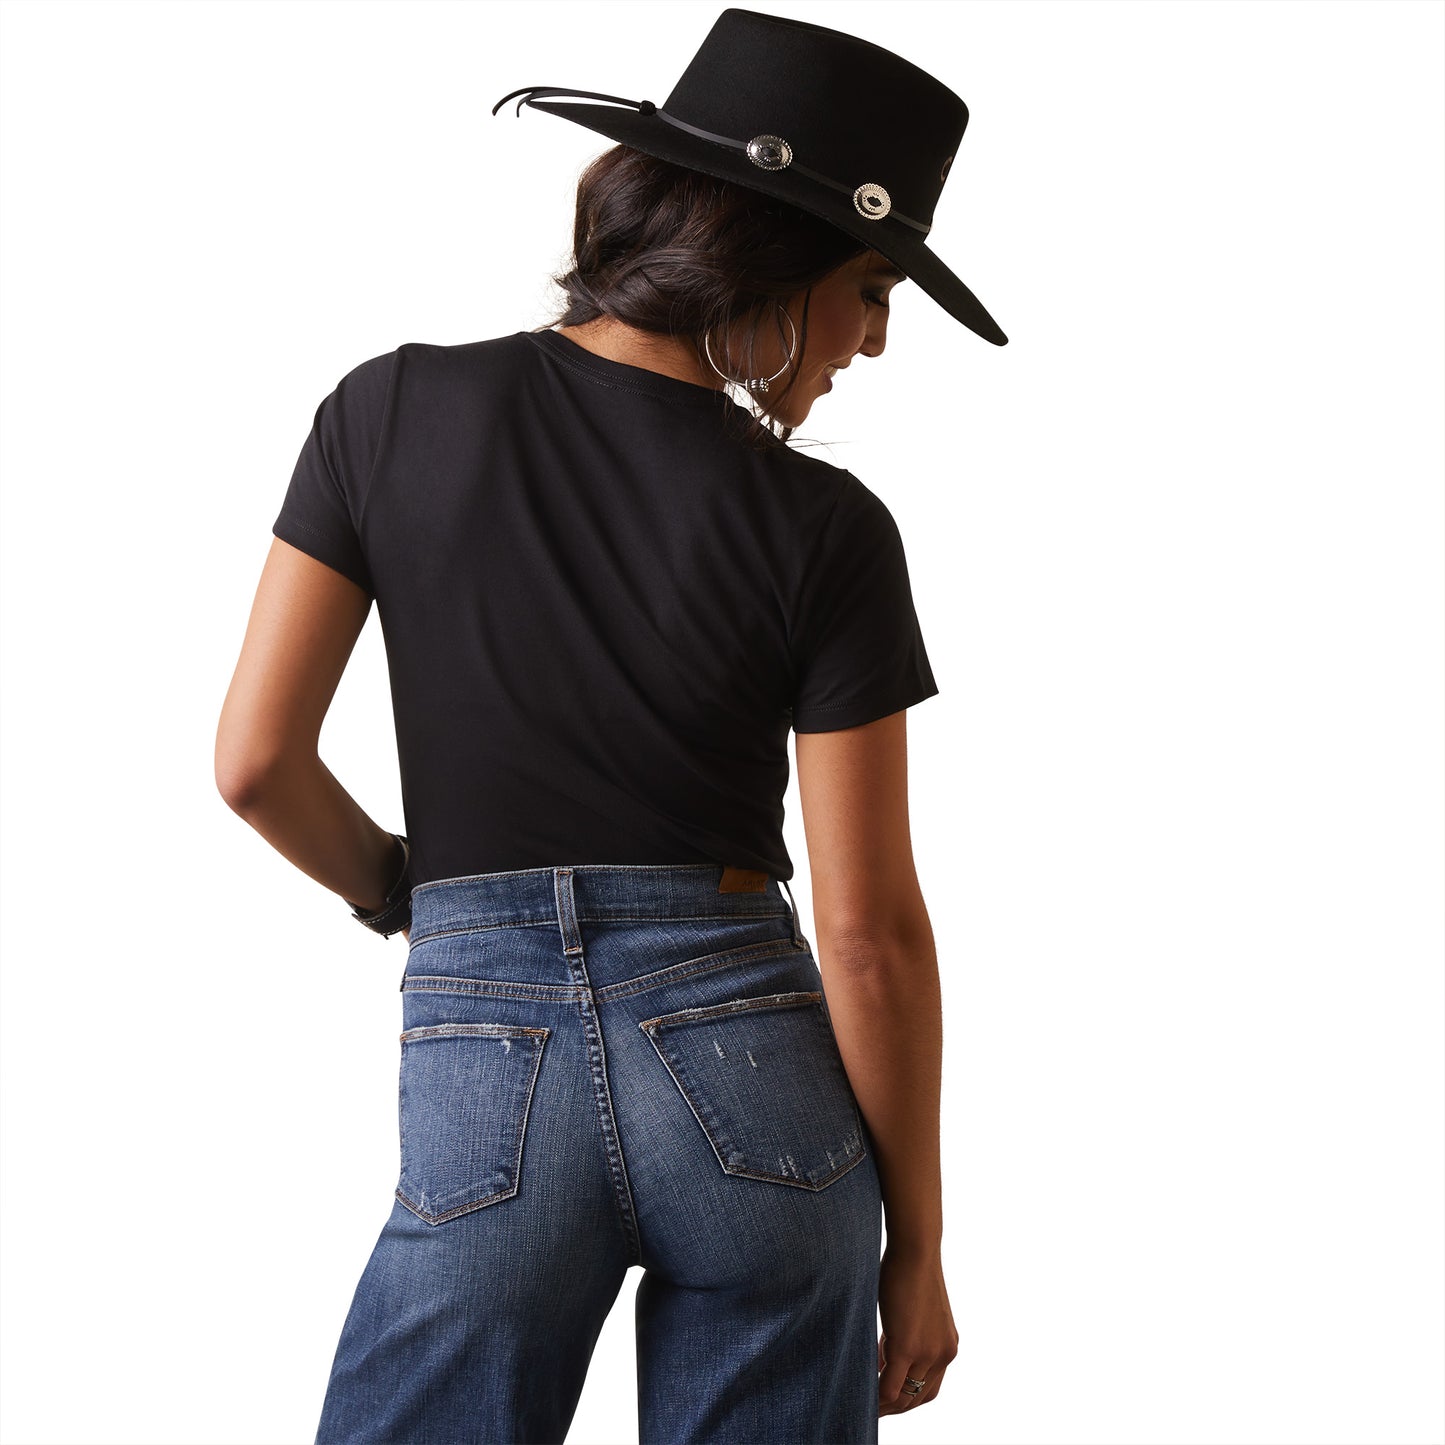 Load image into Gallery viewer, Ariat® Ladies Vintage Rodeo Black Graphic T-Shirt 10044614
